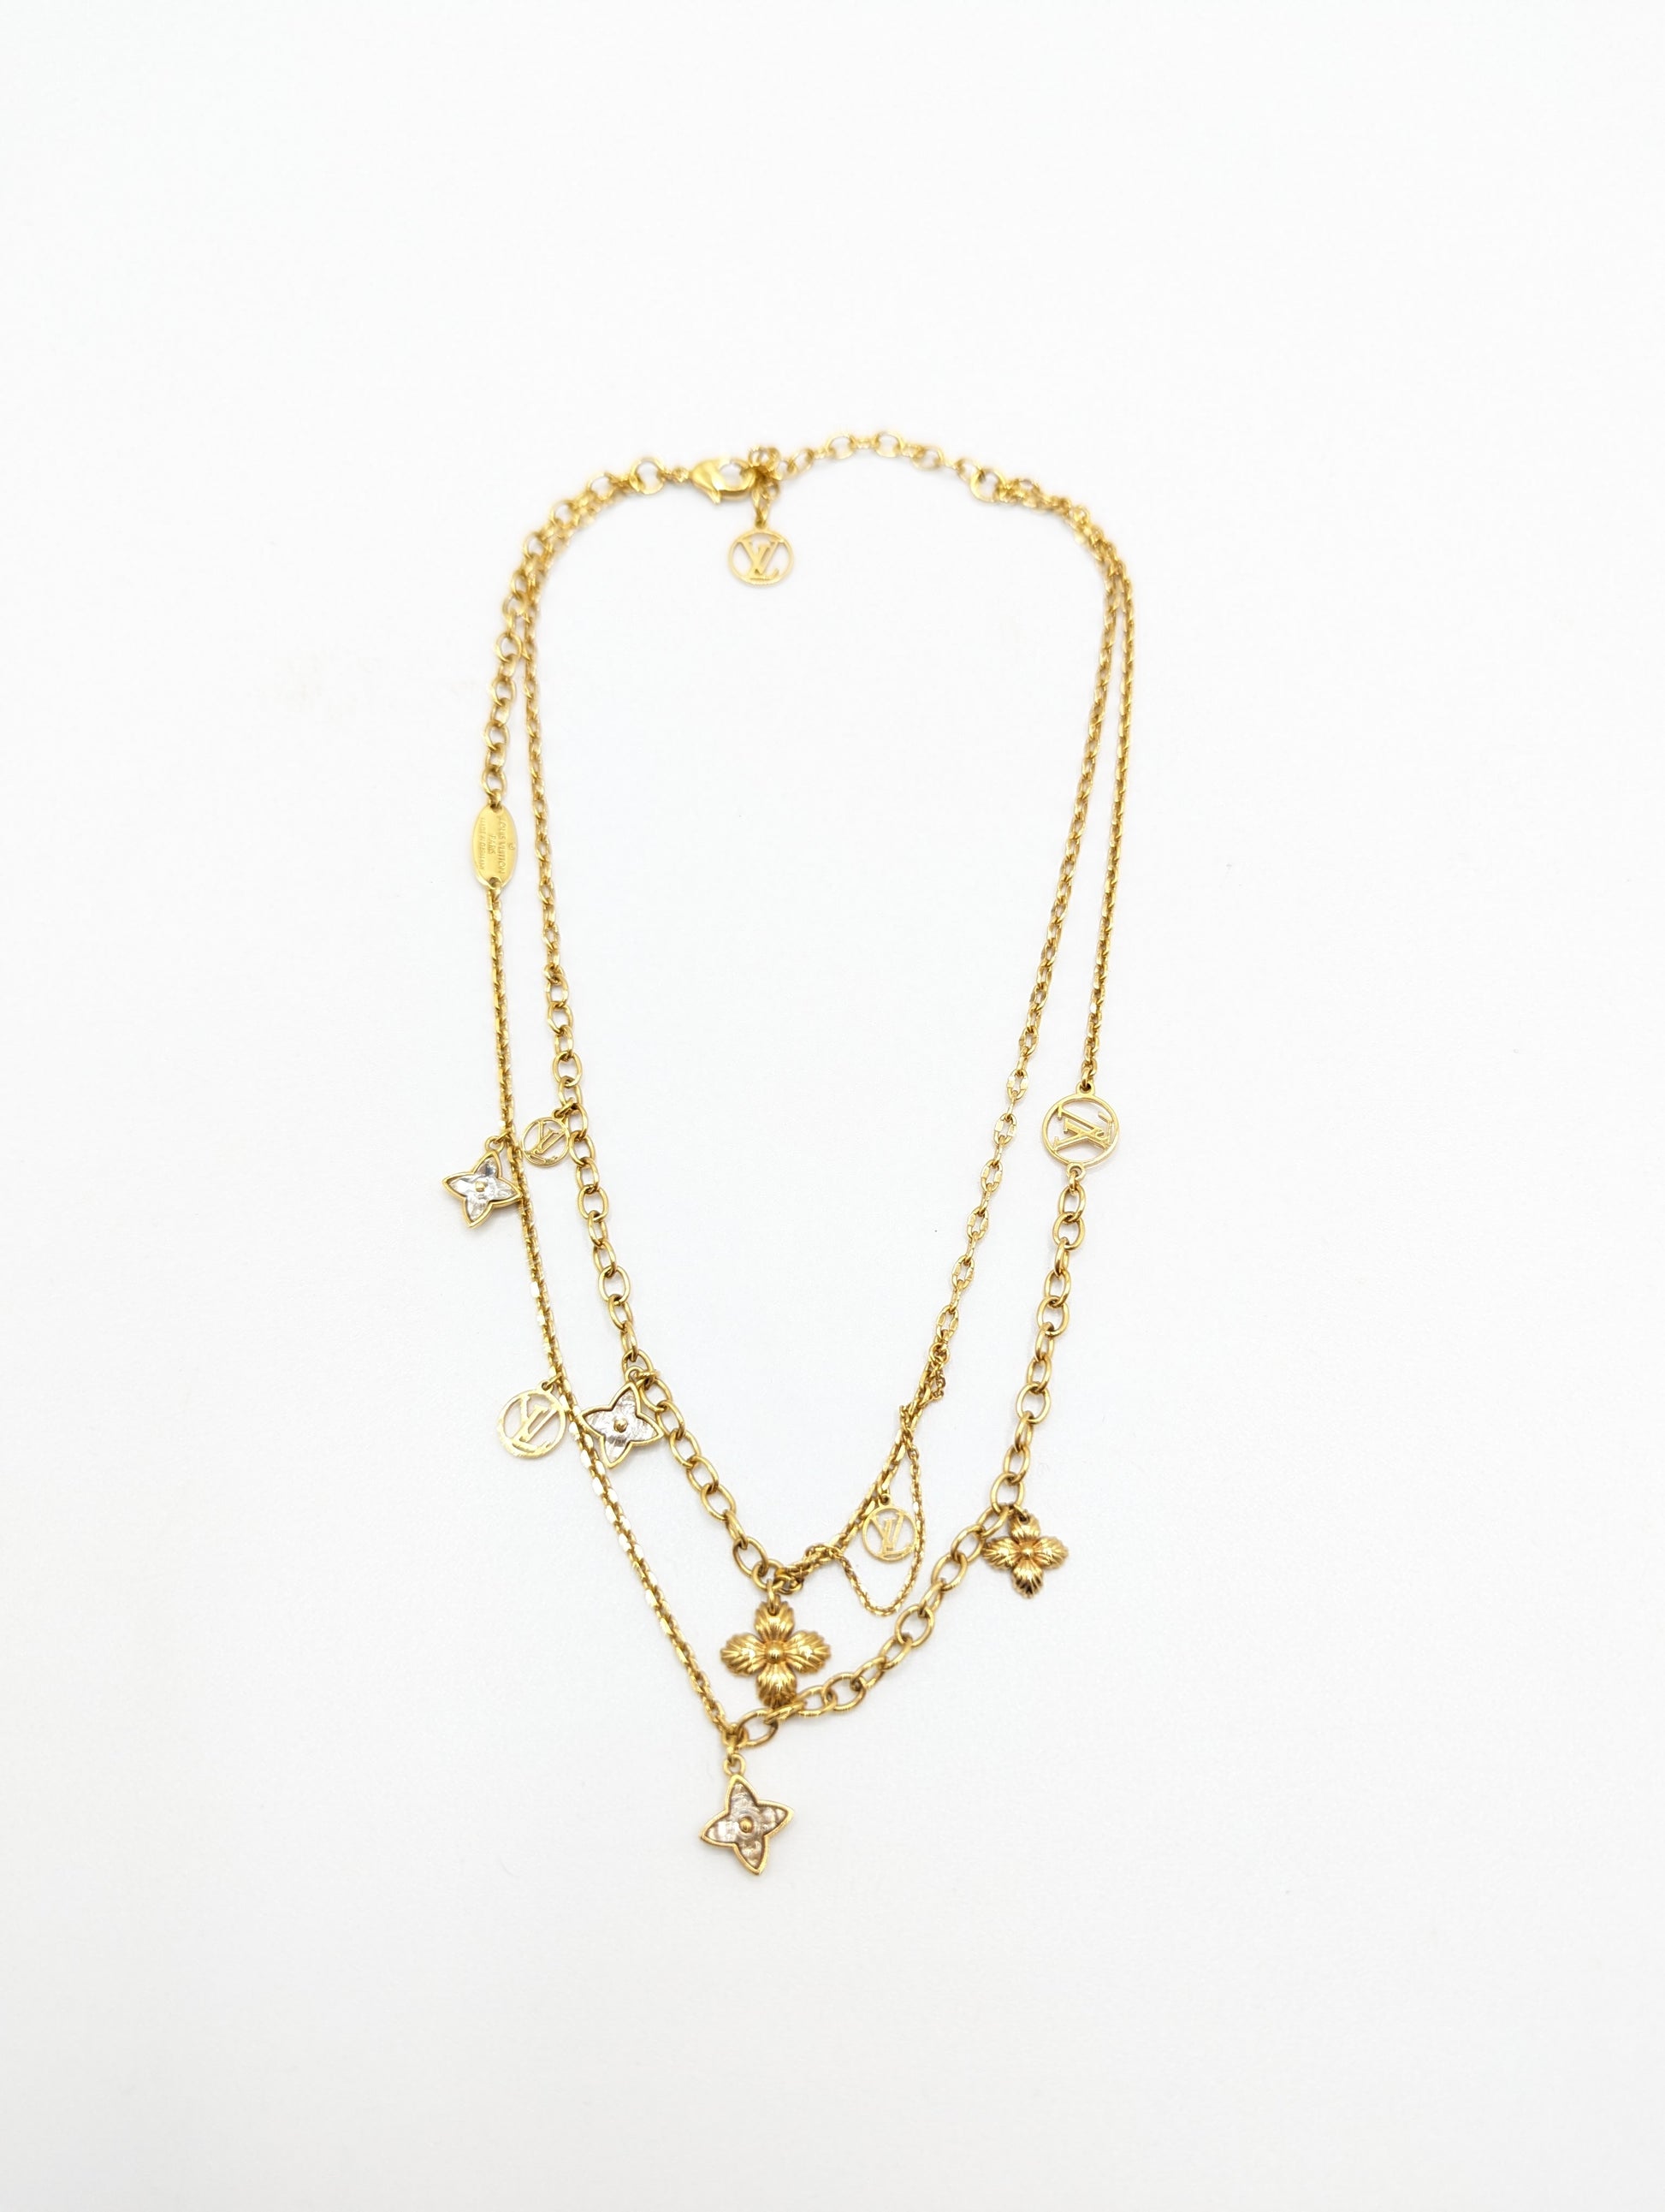 Stunning Blooming Strass Double Chain Charm Necklace – Lux Jewelry Boutique